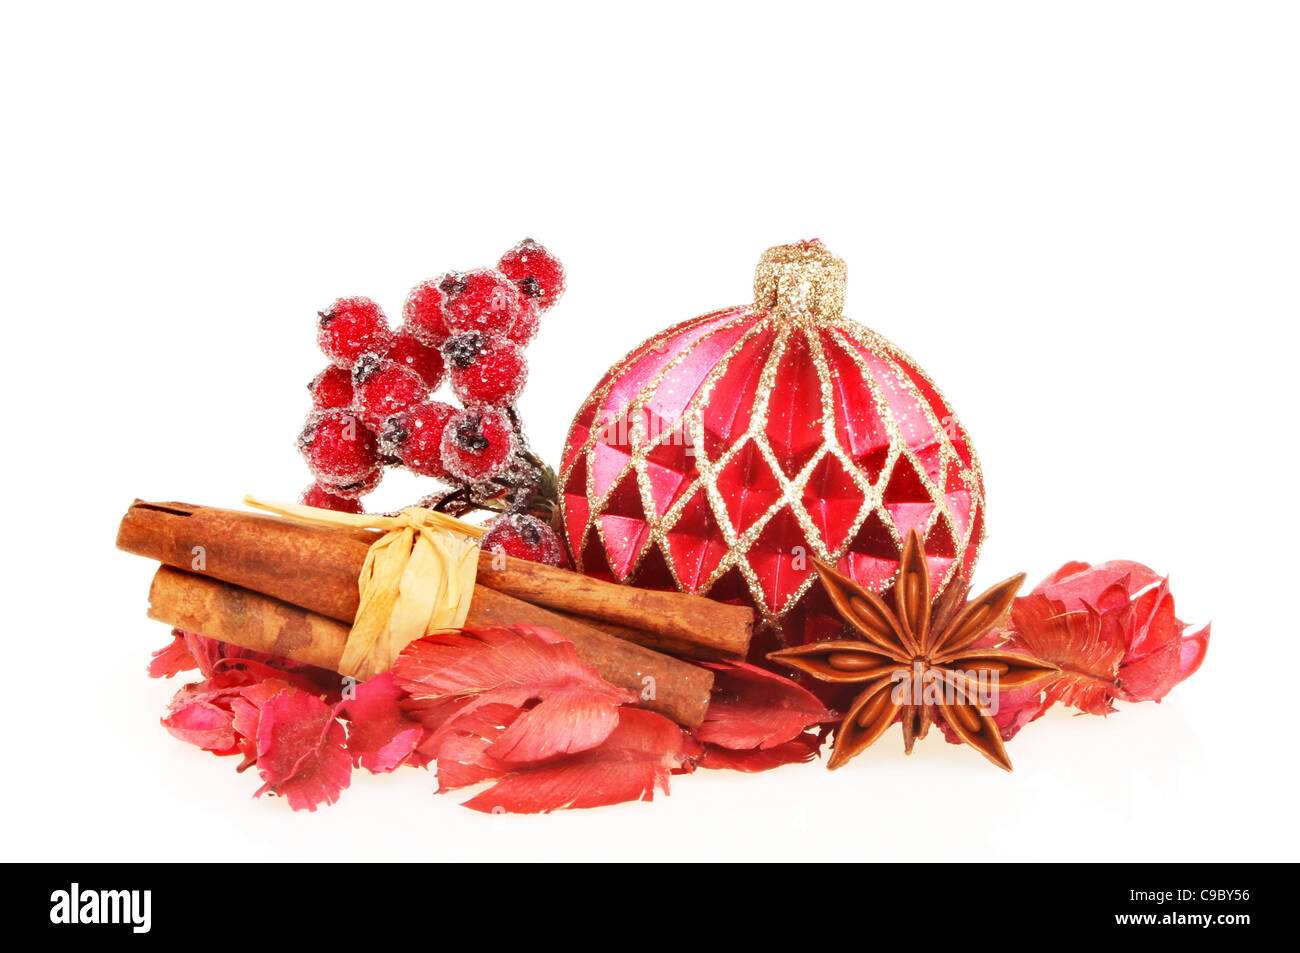 A Christmas theme, decorative bauble, potpourri, spices and a frosted berry decoration isolated on white Stock Photo